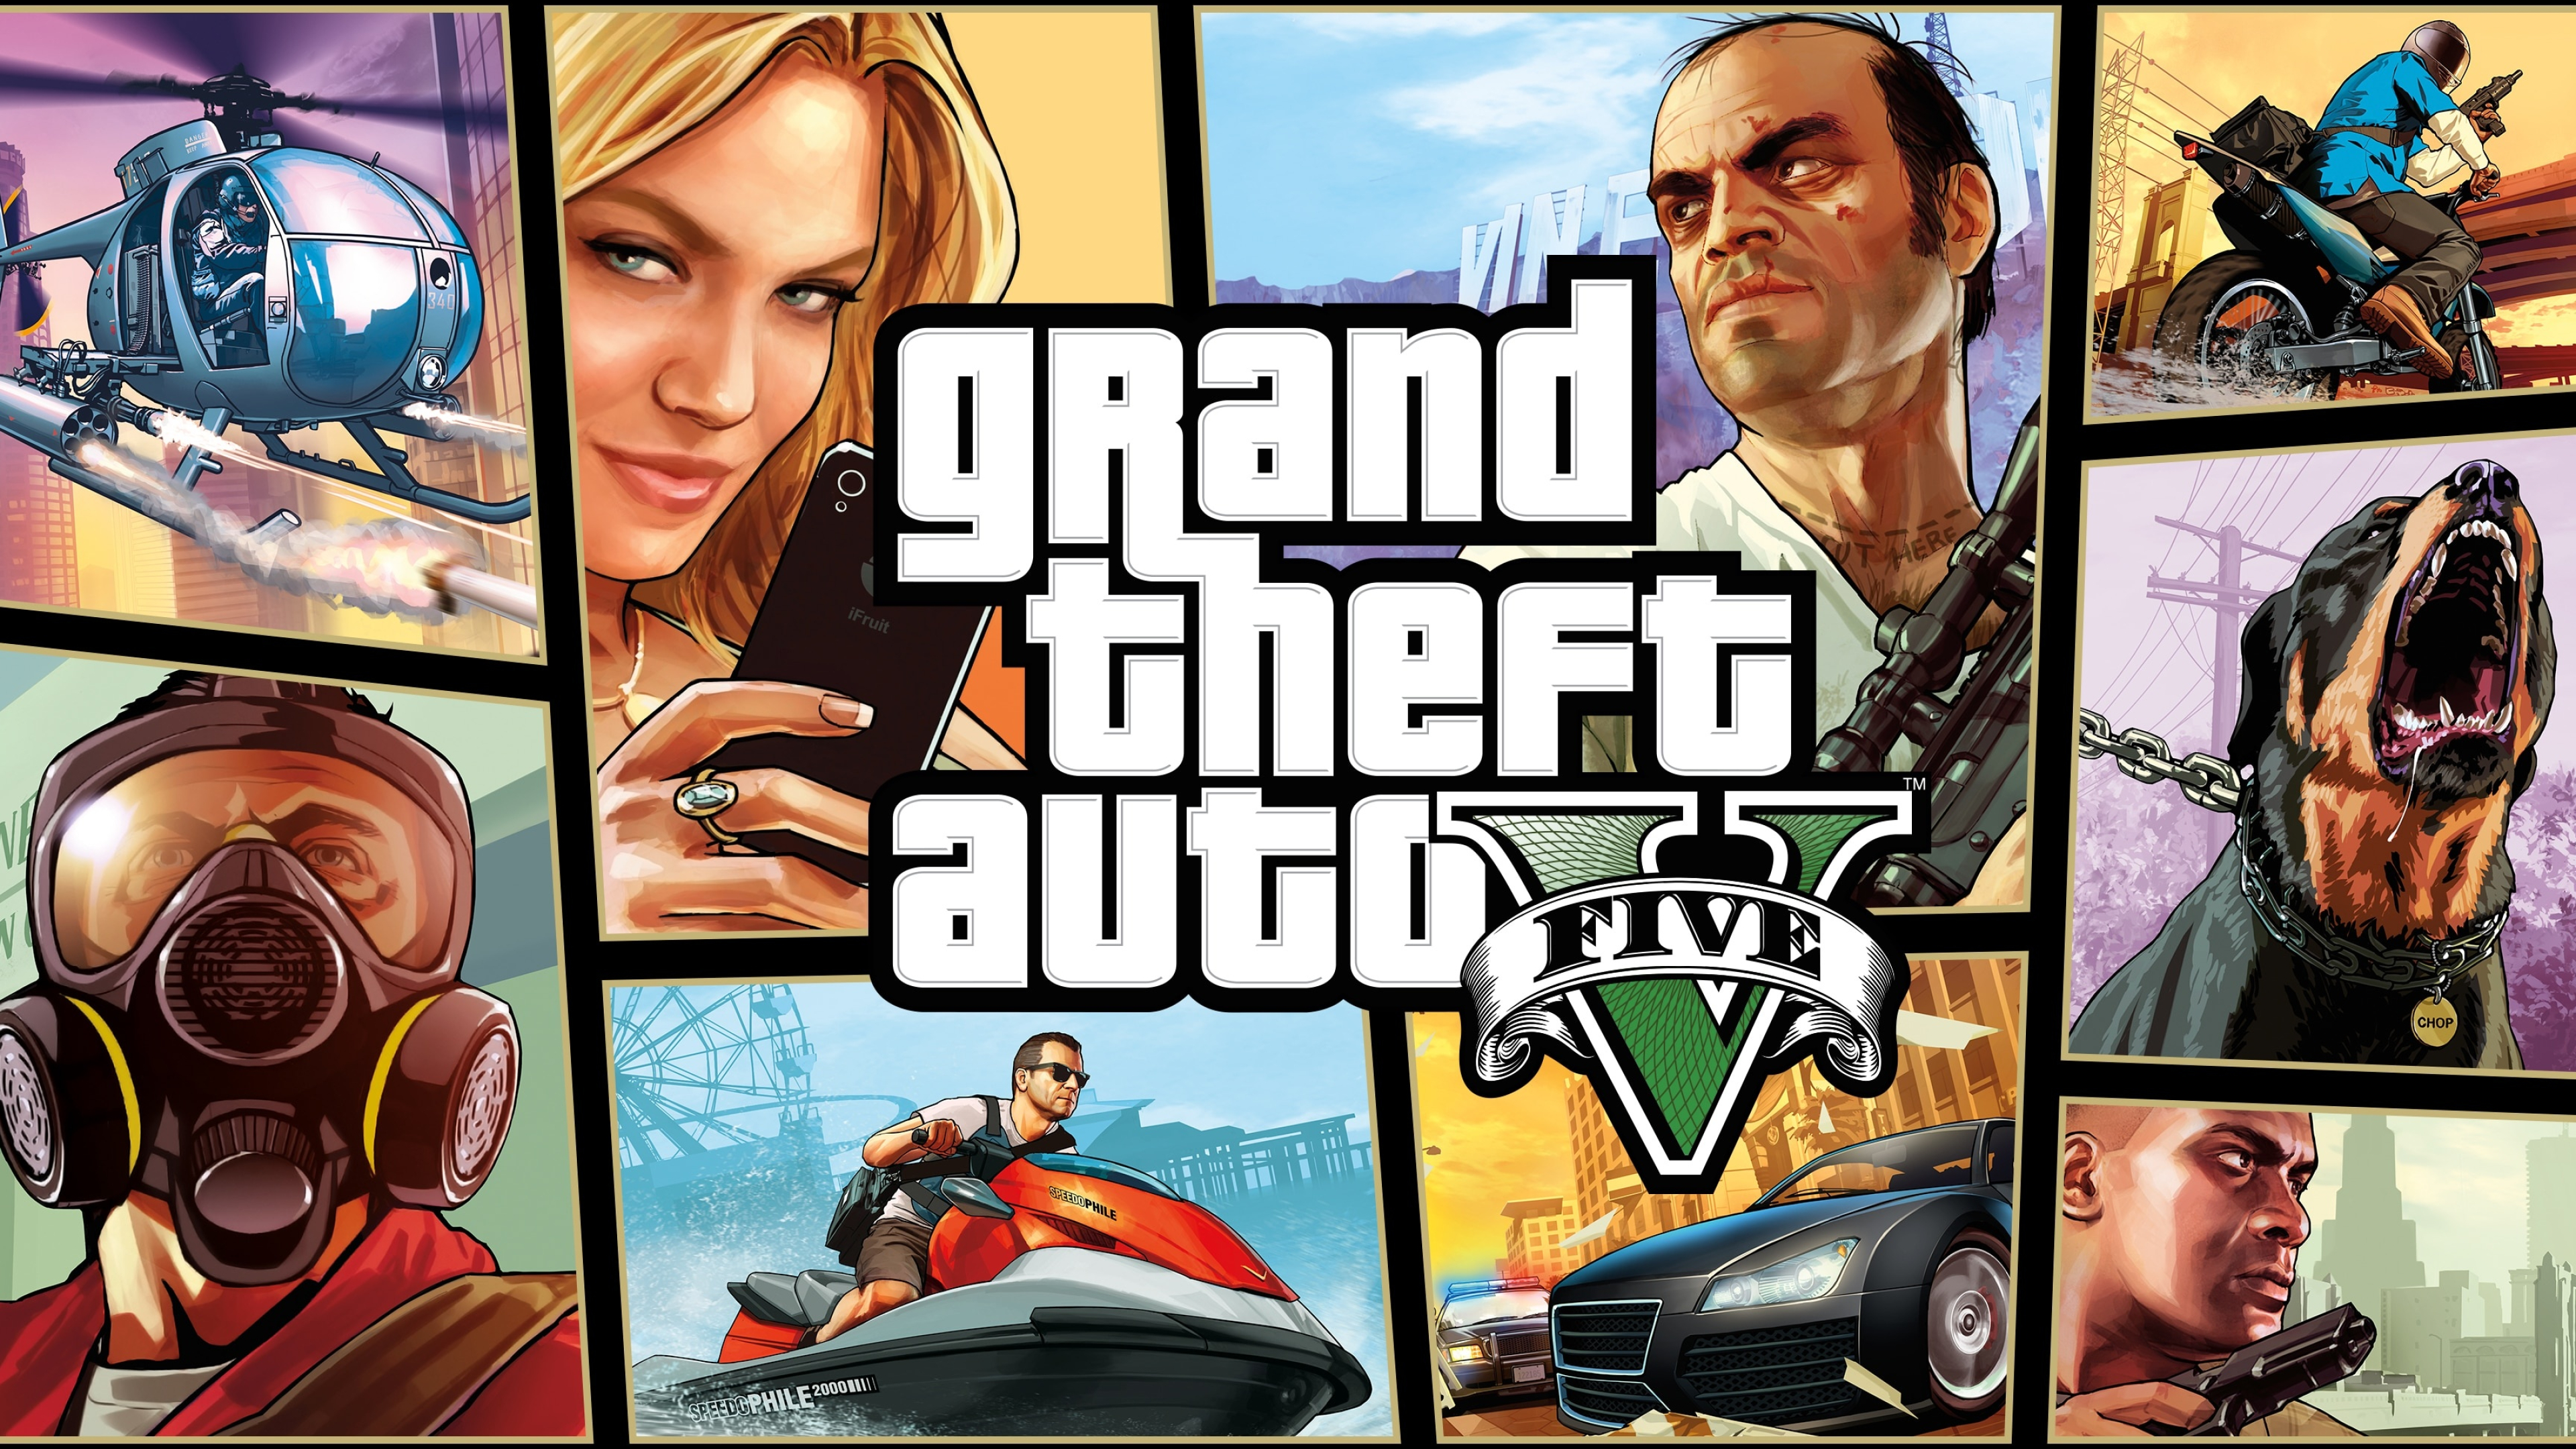 Grand Theft Auto V, Iconic game, Endless possibilities, Thrilling storyline, 3840x2160 4K Desktop